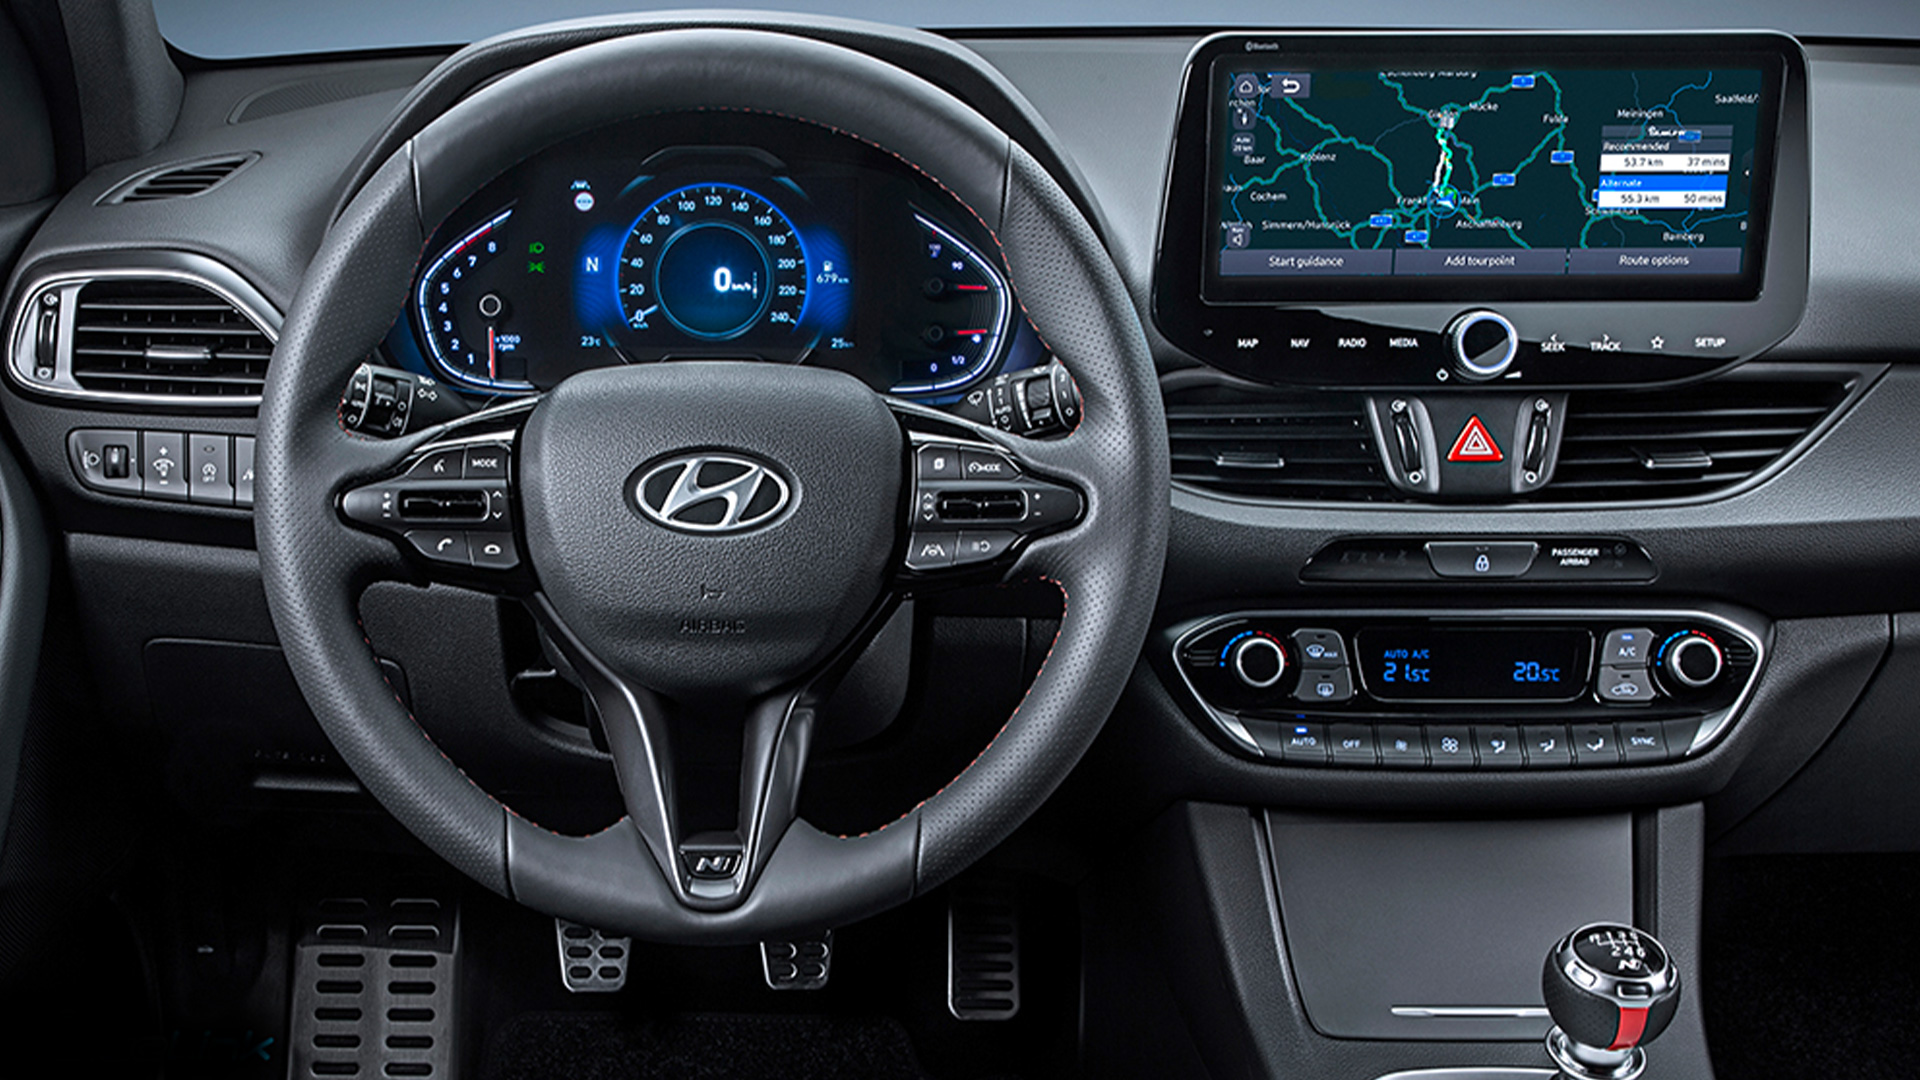 Hyundai Motor enhances connectivity with upgraded Bluelink - starting with the new i30